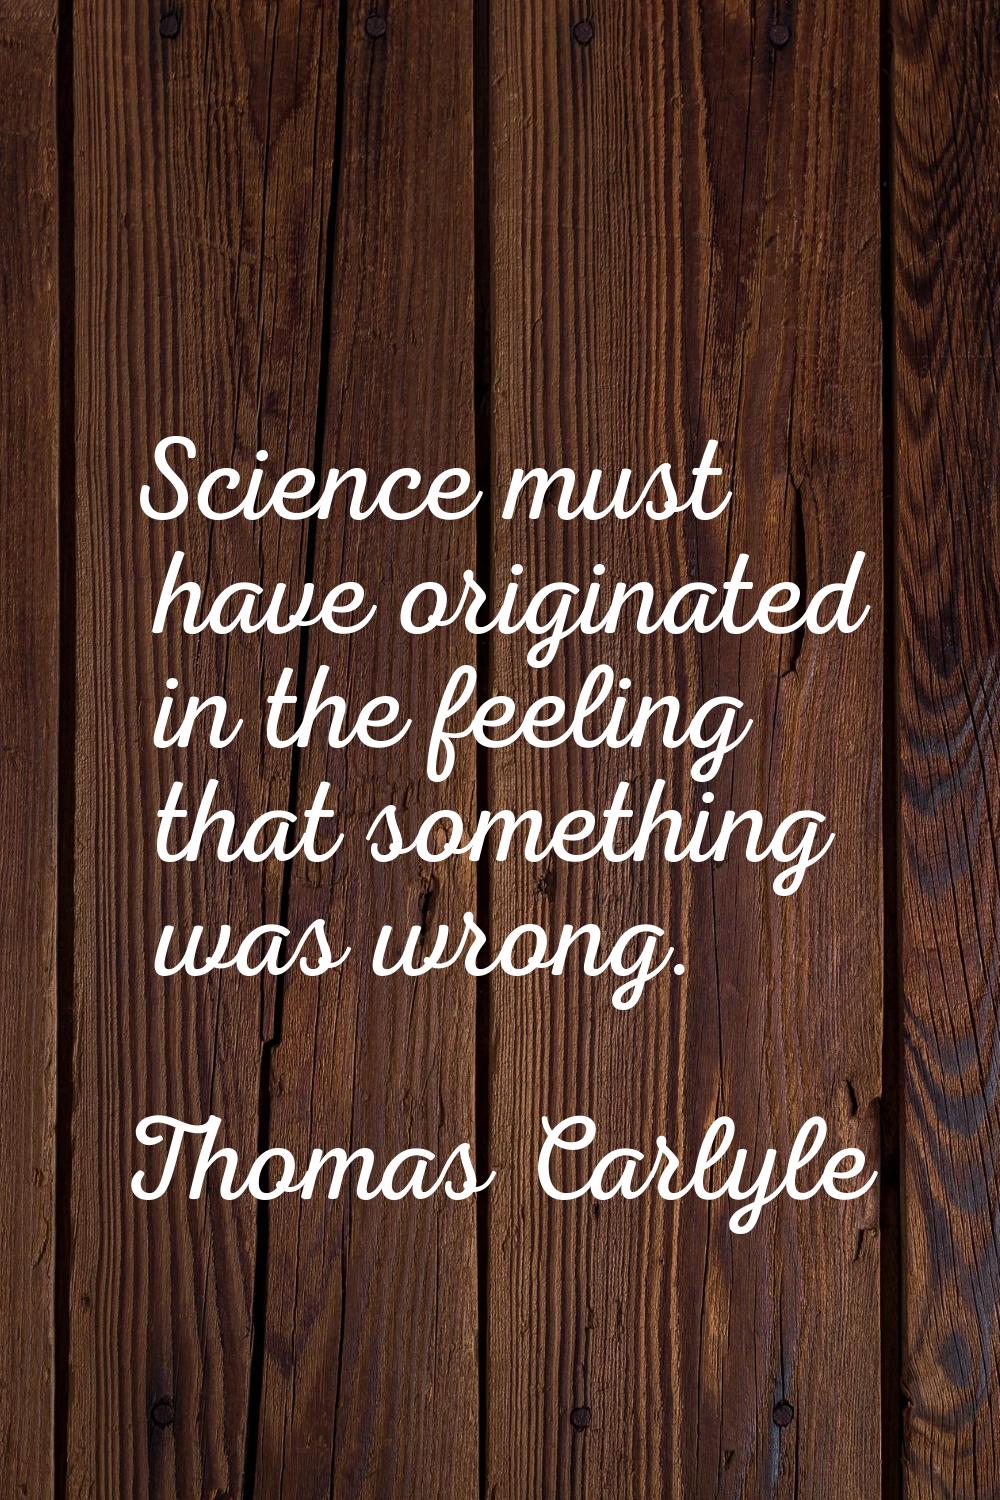 Science must have originated in the feeling that something was wrong.